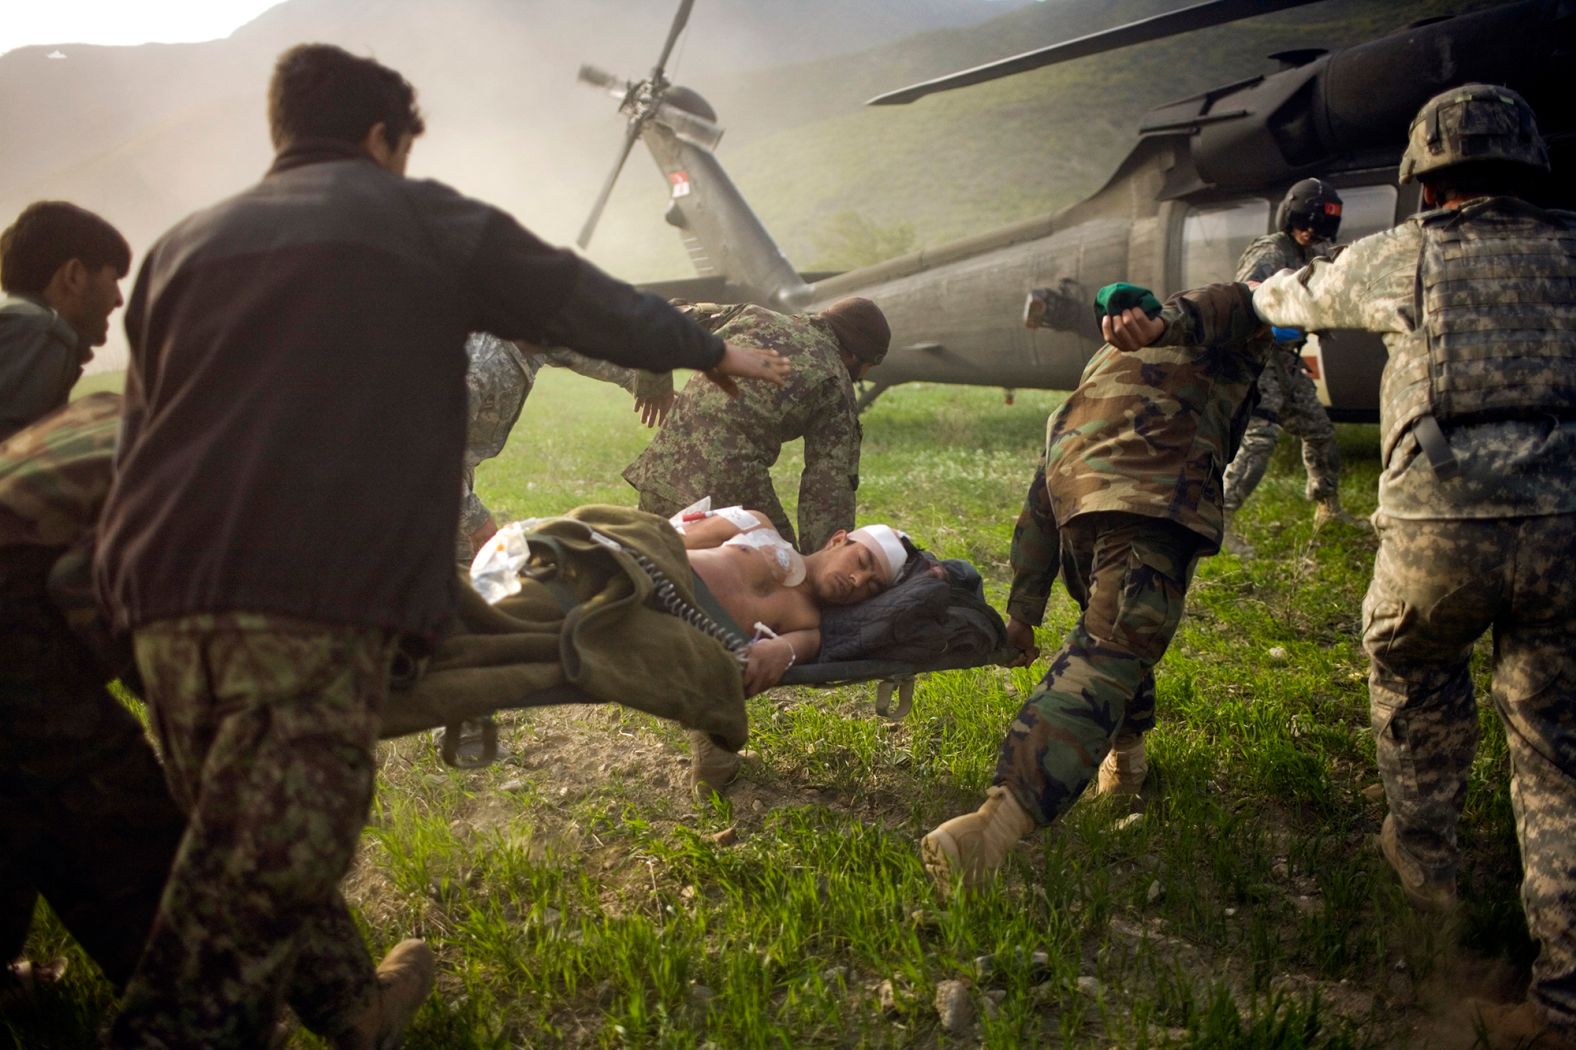 Afghan soldiers rush a wounded police officer to an American helicopter in Afghanistan's Kunar province in March 2010.